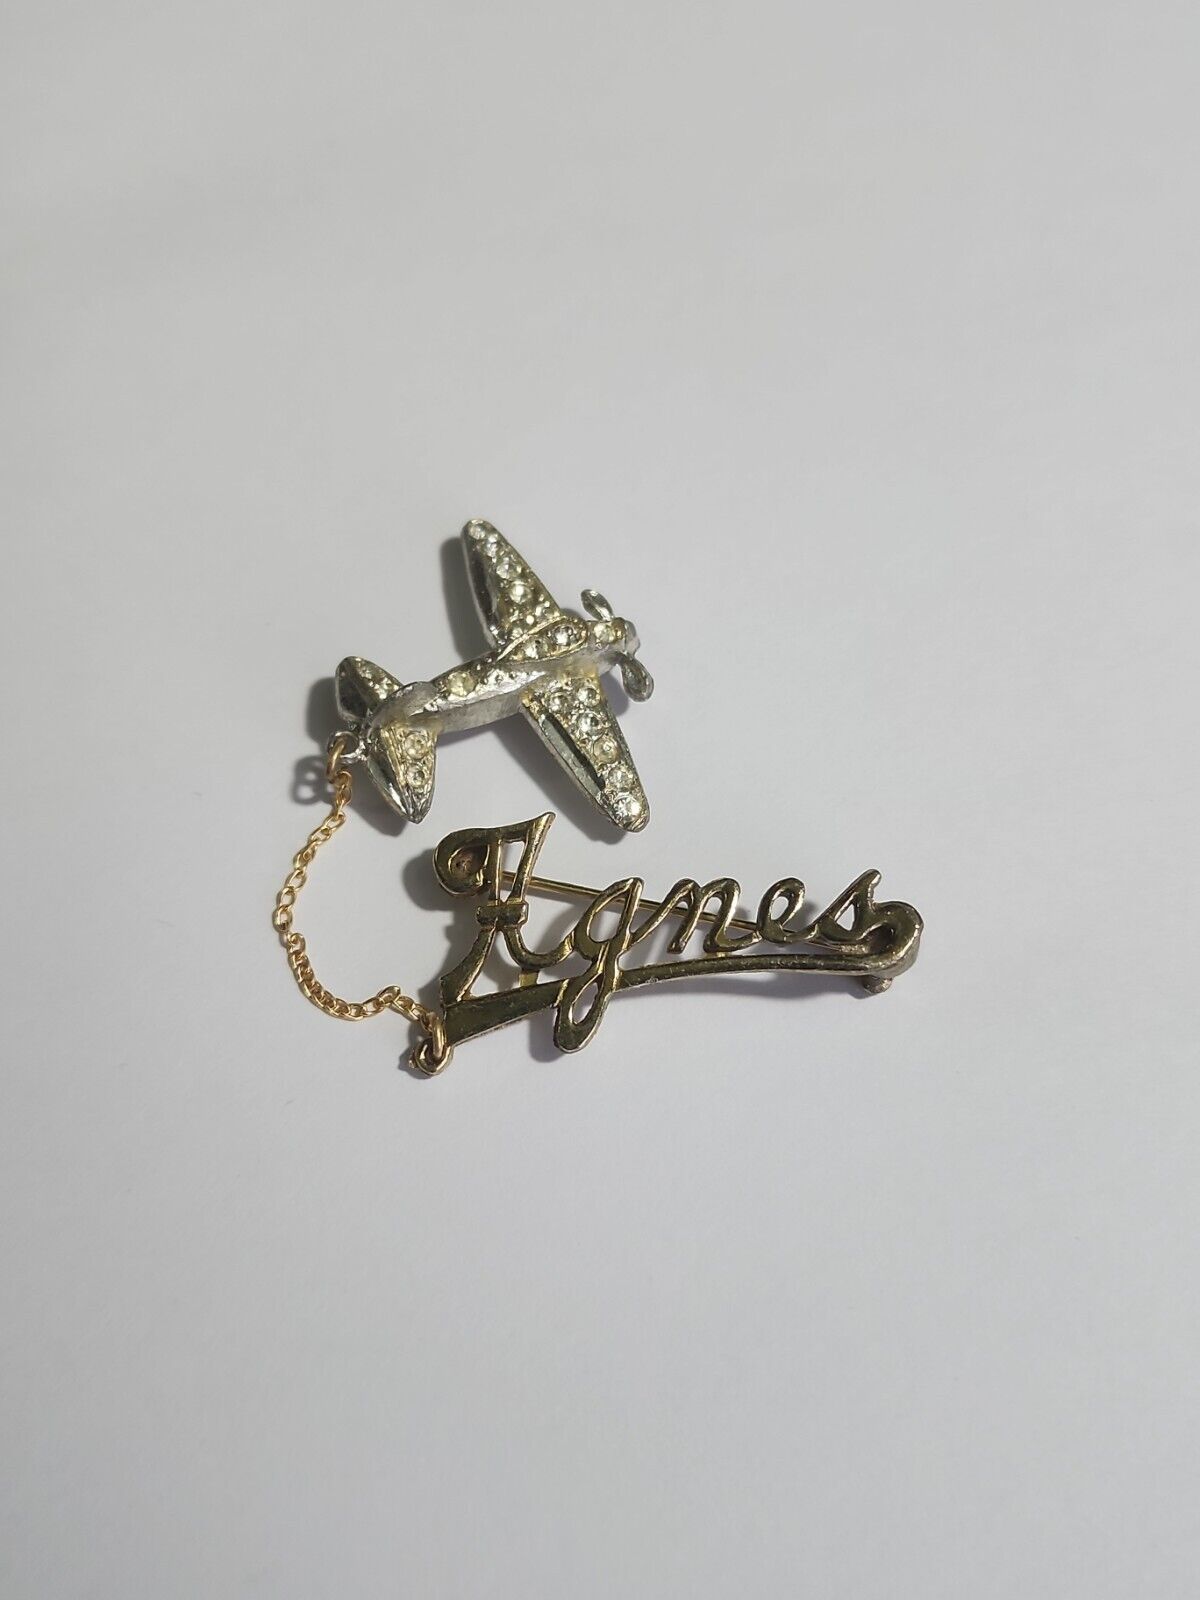 Airplane Brooch Pin 2-Piece Attached with Chain \